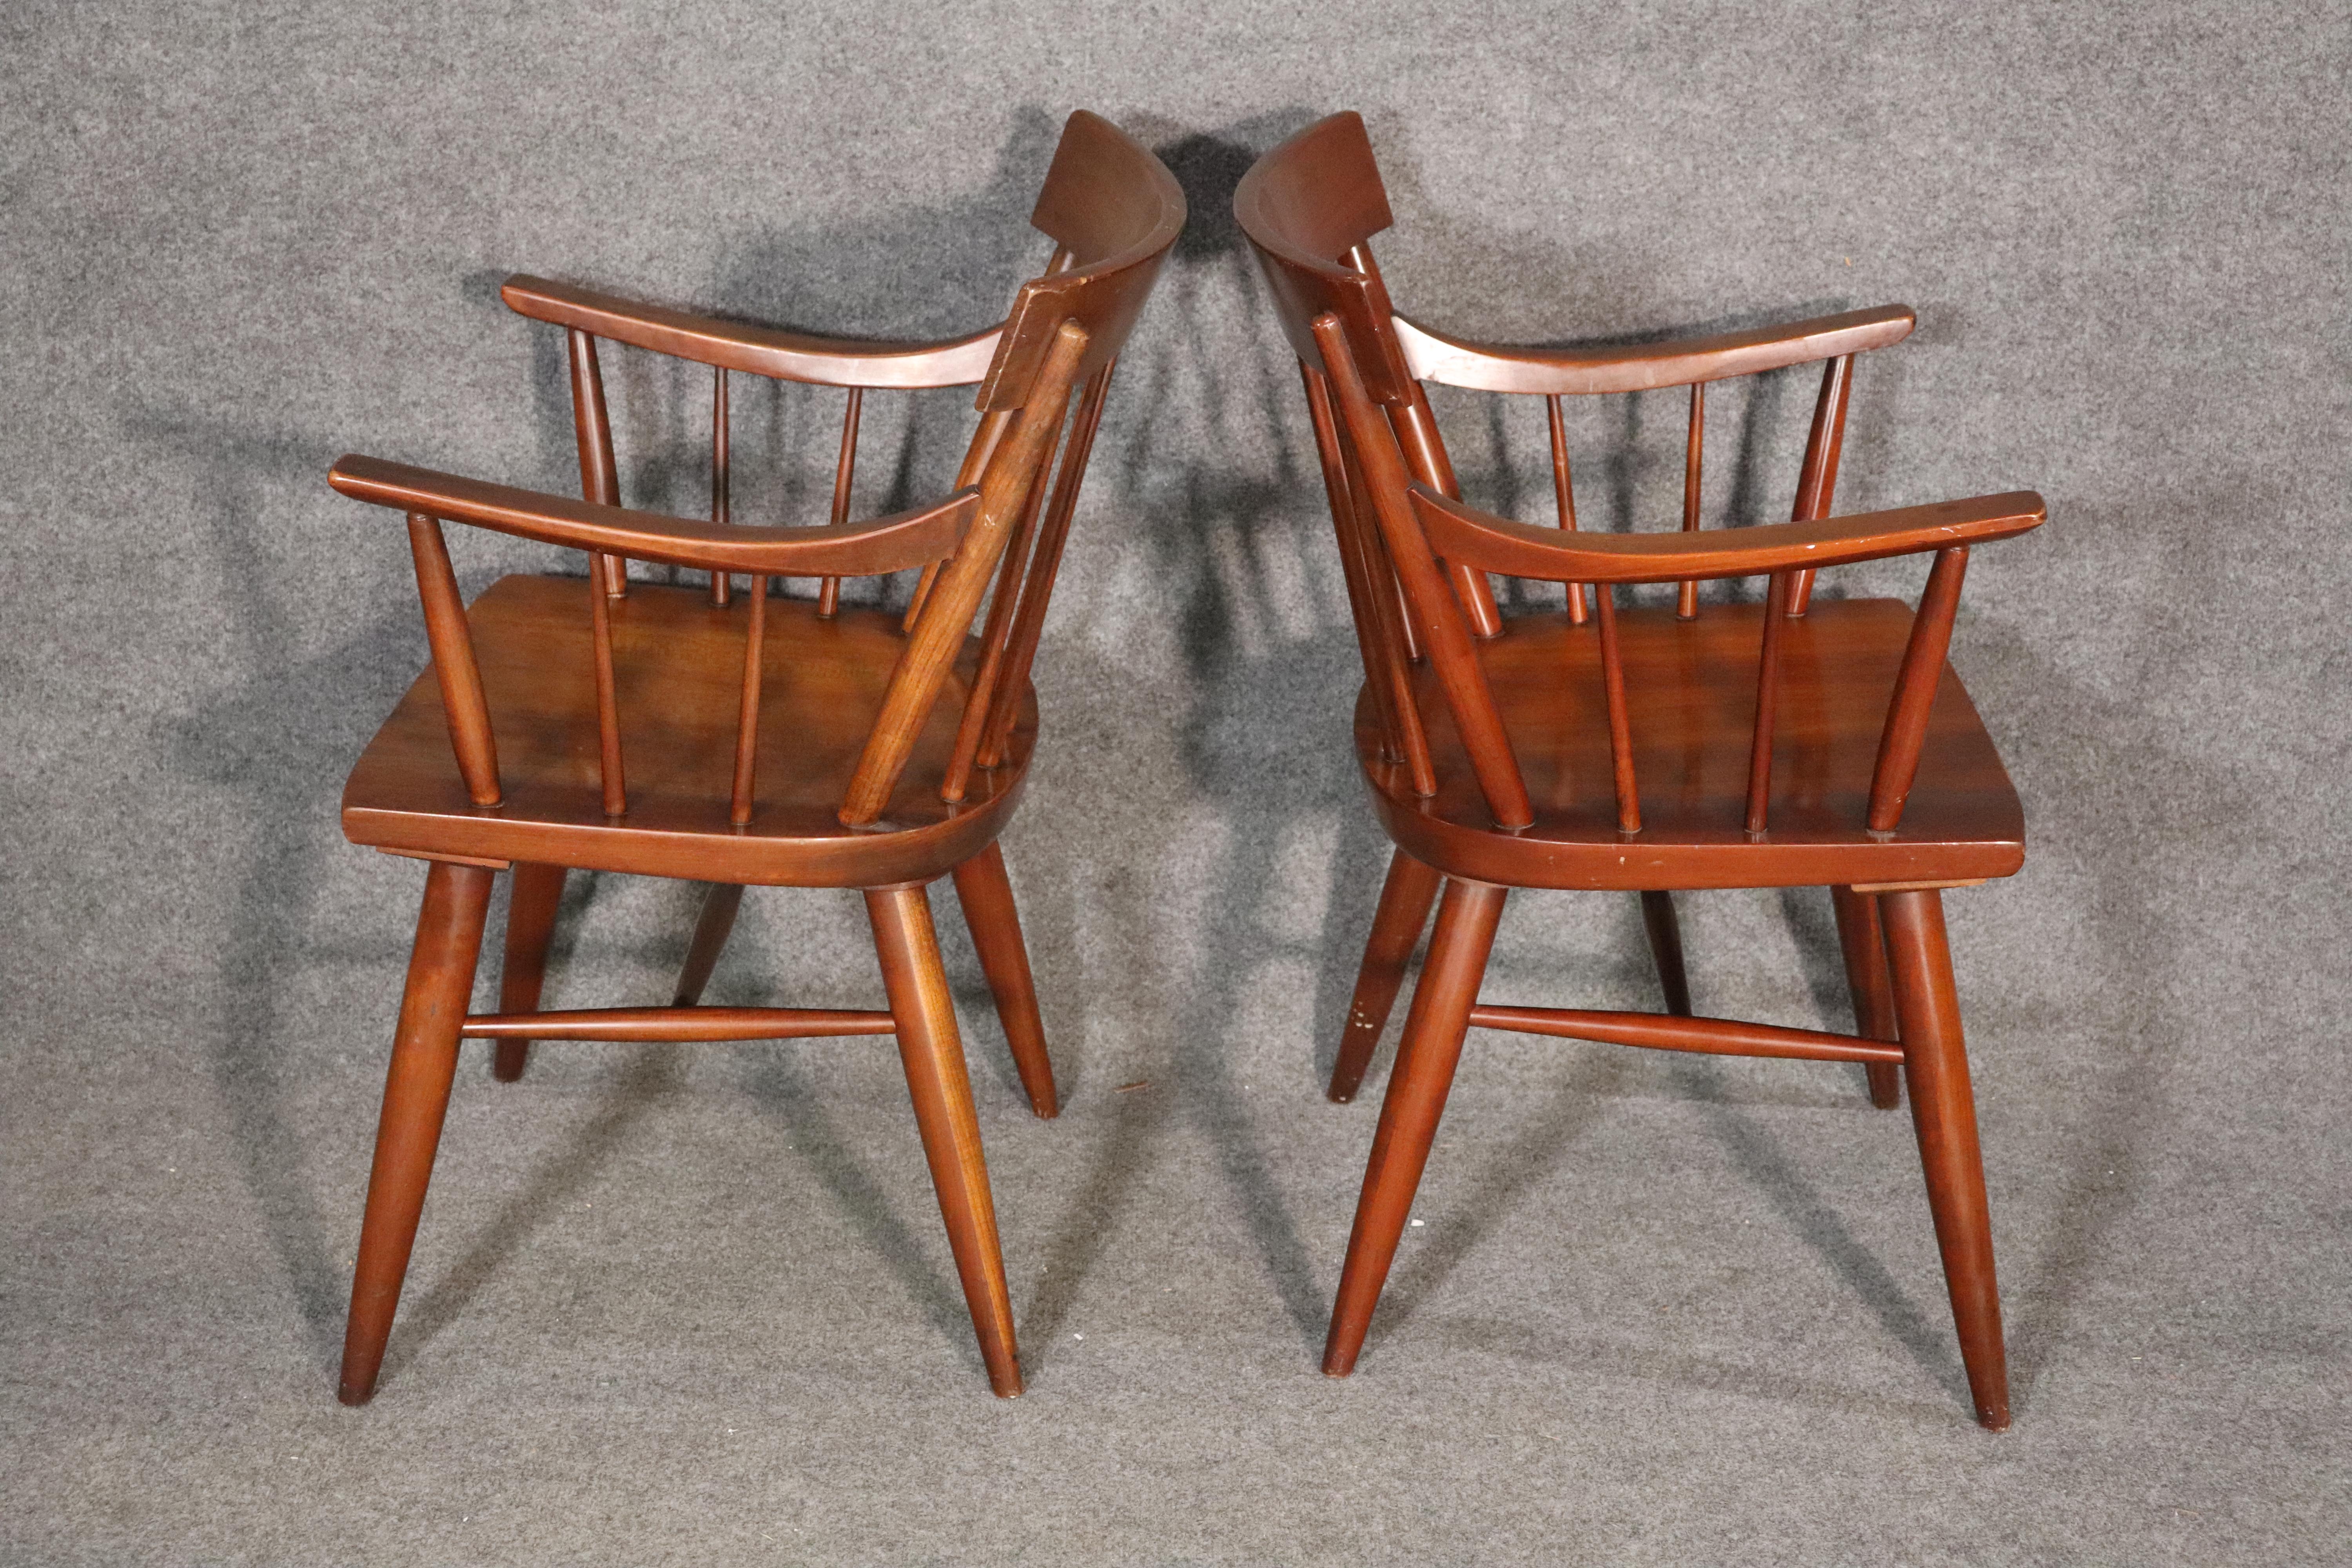 Set of six dining chairs, four armless, 2 throne chairs, with spindle backs. Closely resembling the iconic Planner Group chairs by Paul McCobb, with tapered spindles and shovel seats. The armchairs have a nice swoop design.
Please confirm location